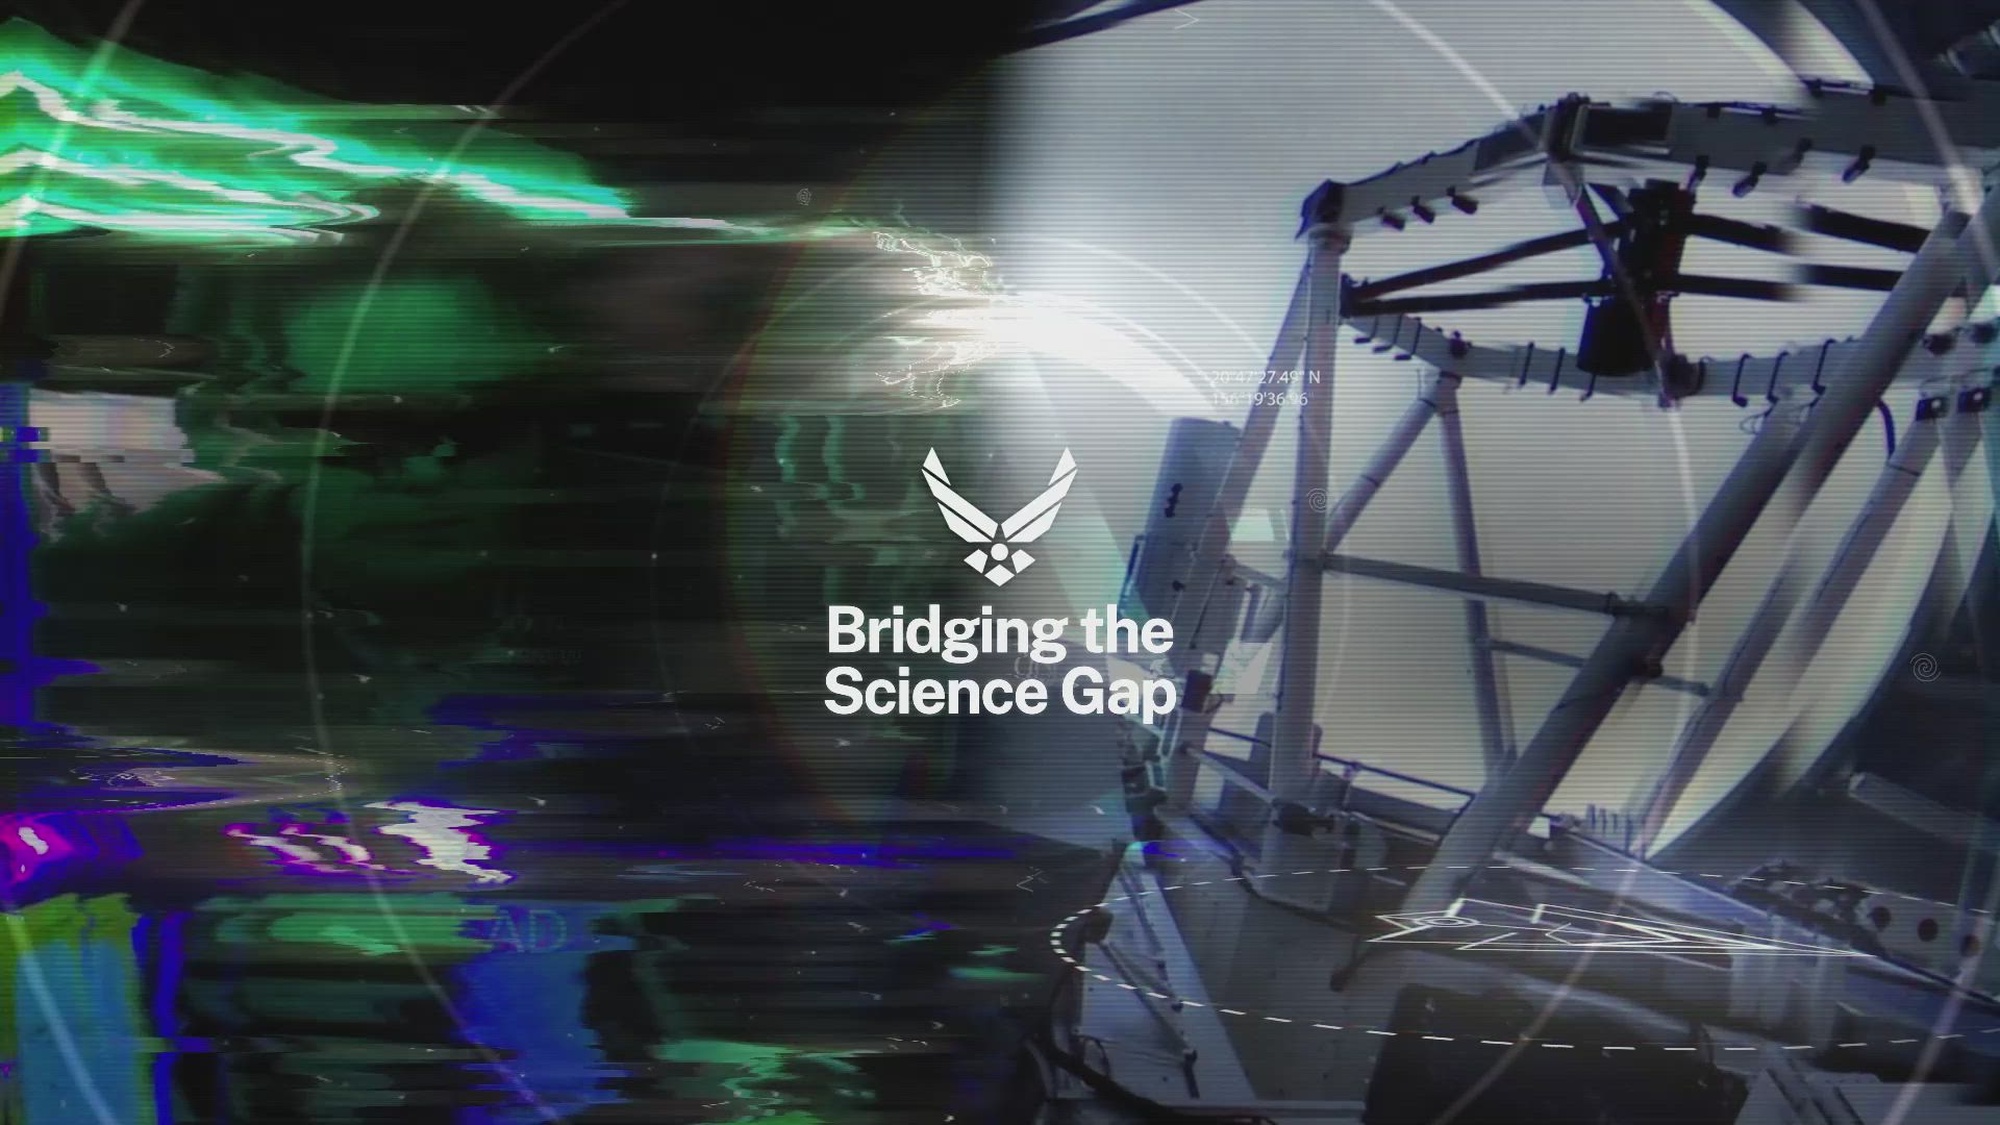 Bridging the Science Gap looping video title for Airman Magazine.